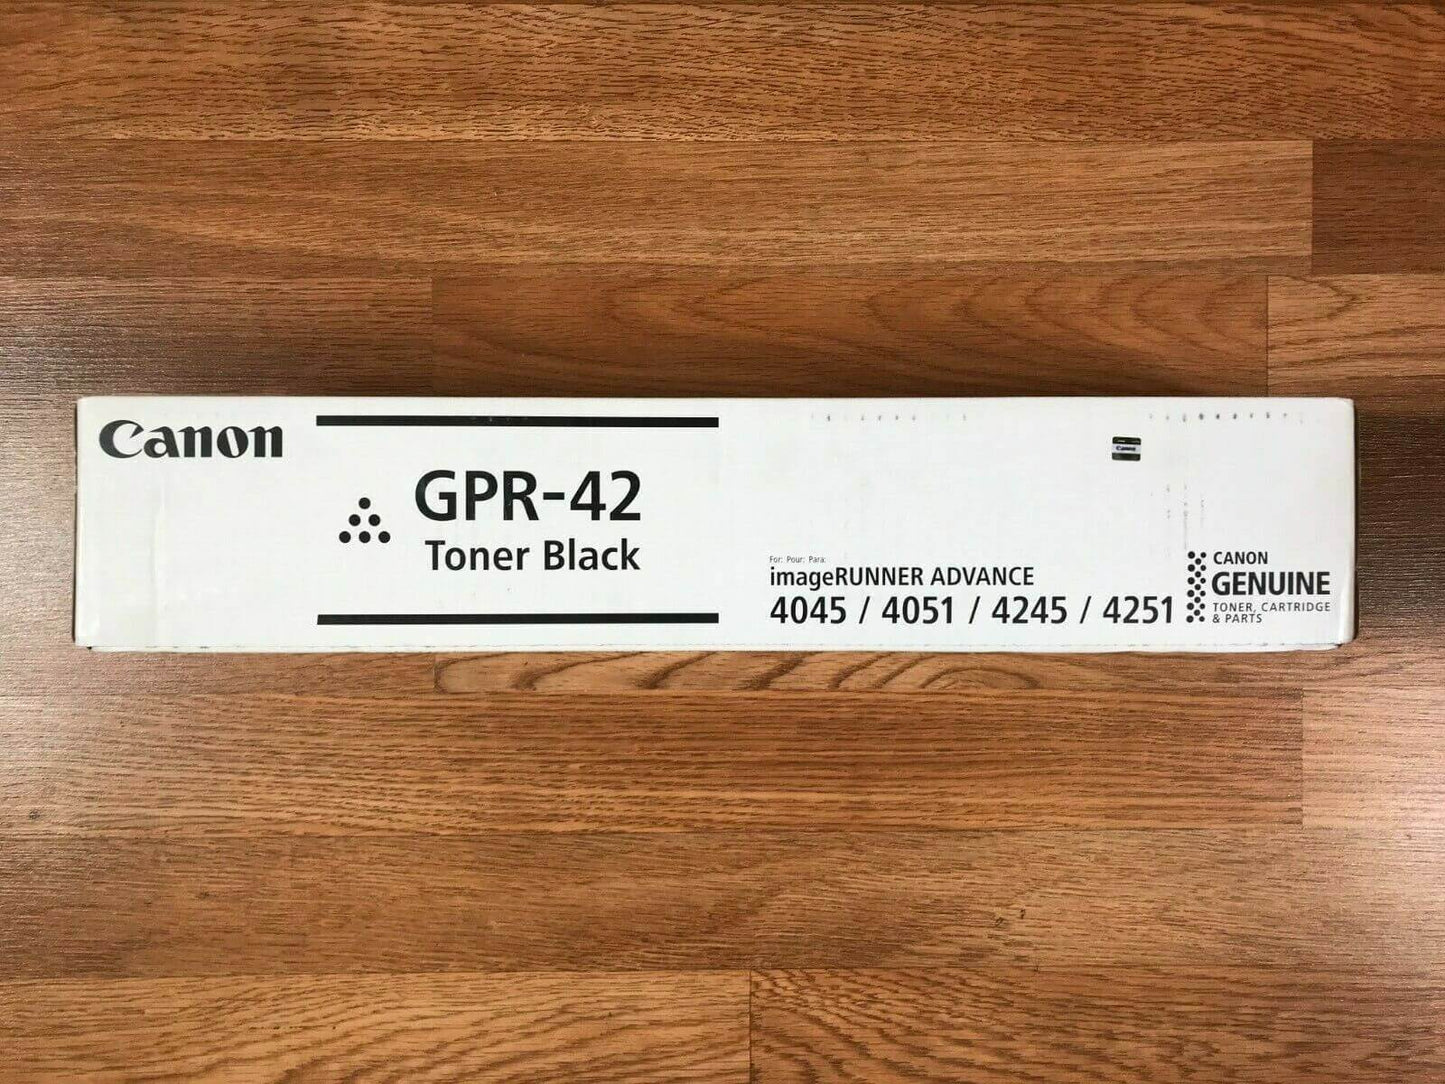 Canon GPR-42 Black Toner For iR ADV 4045 / 4051 / 4245 / 4251 Same Day Shipping! - copier-clearance-center